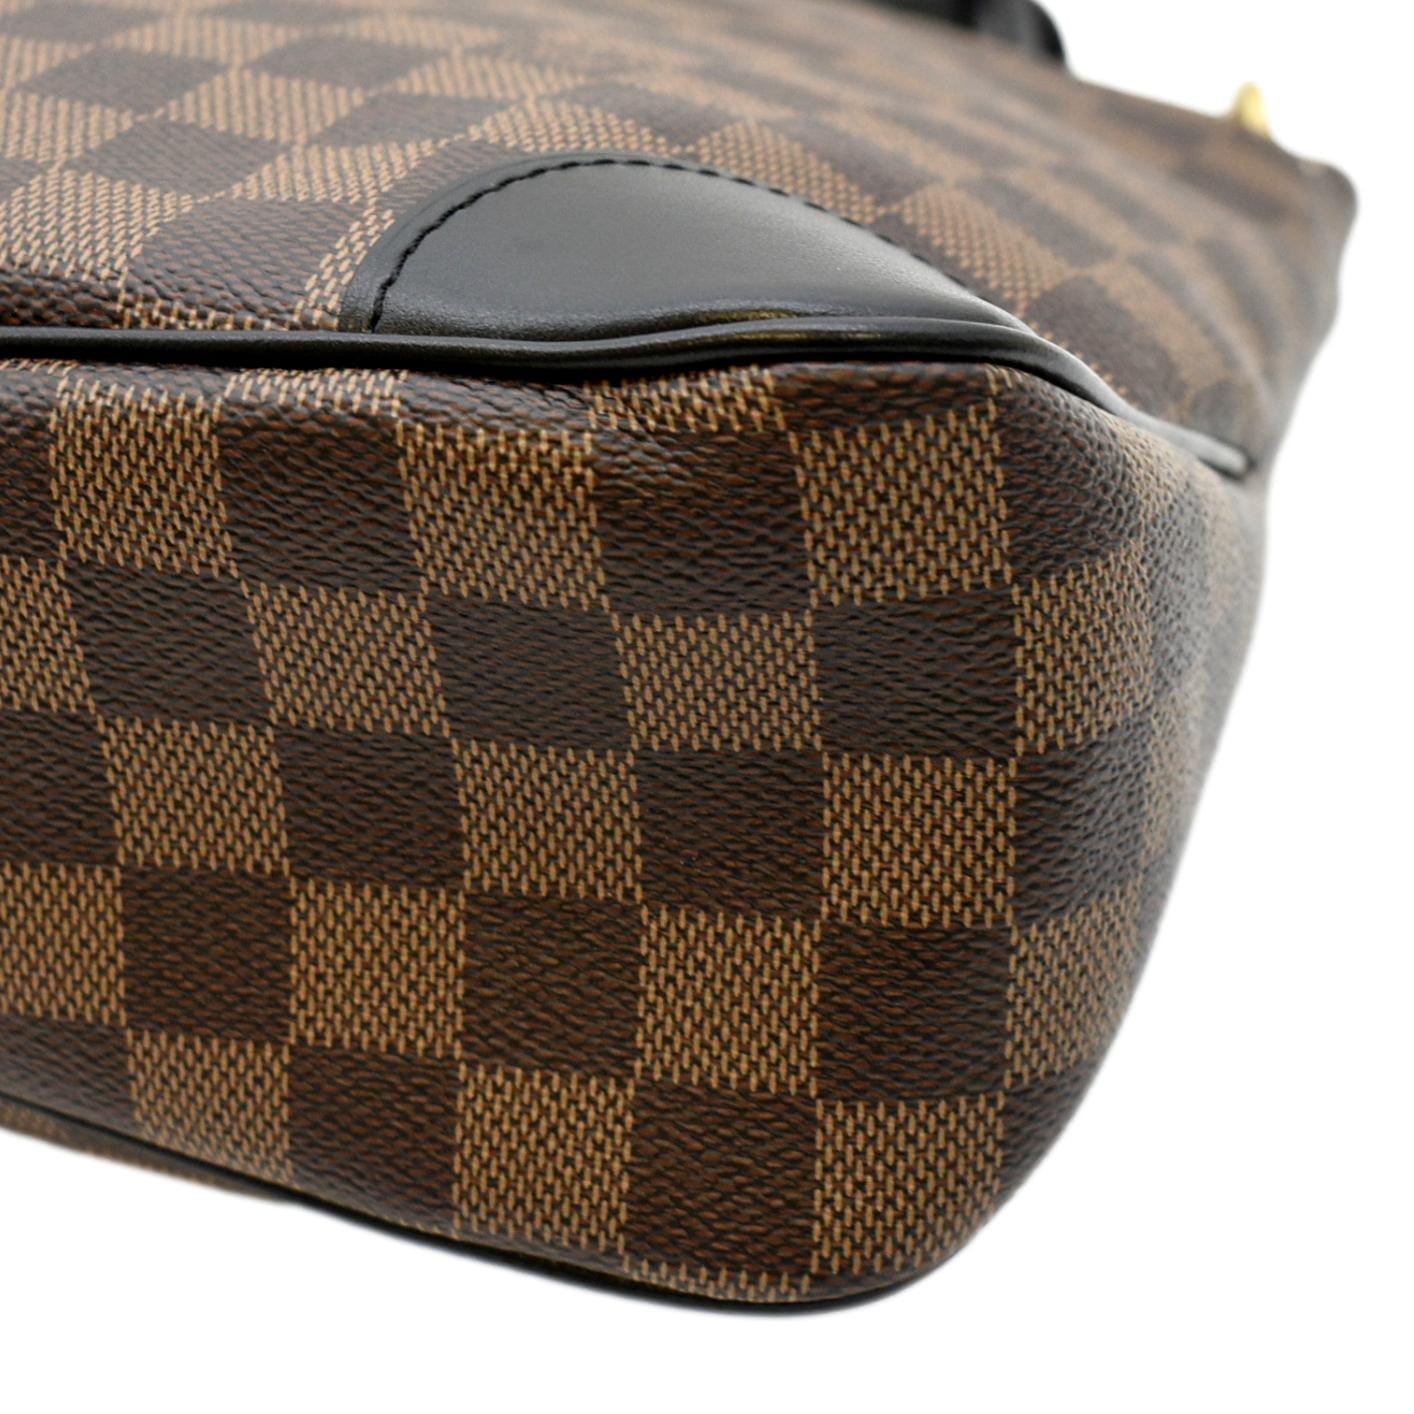 LOUIS VUITTON Damier Odeon Tote bag MM N45283 BRAND NEW! GORGEOUS! SOLD OUT  ❤️